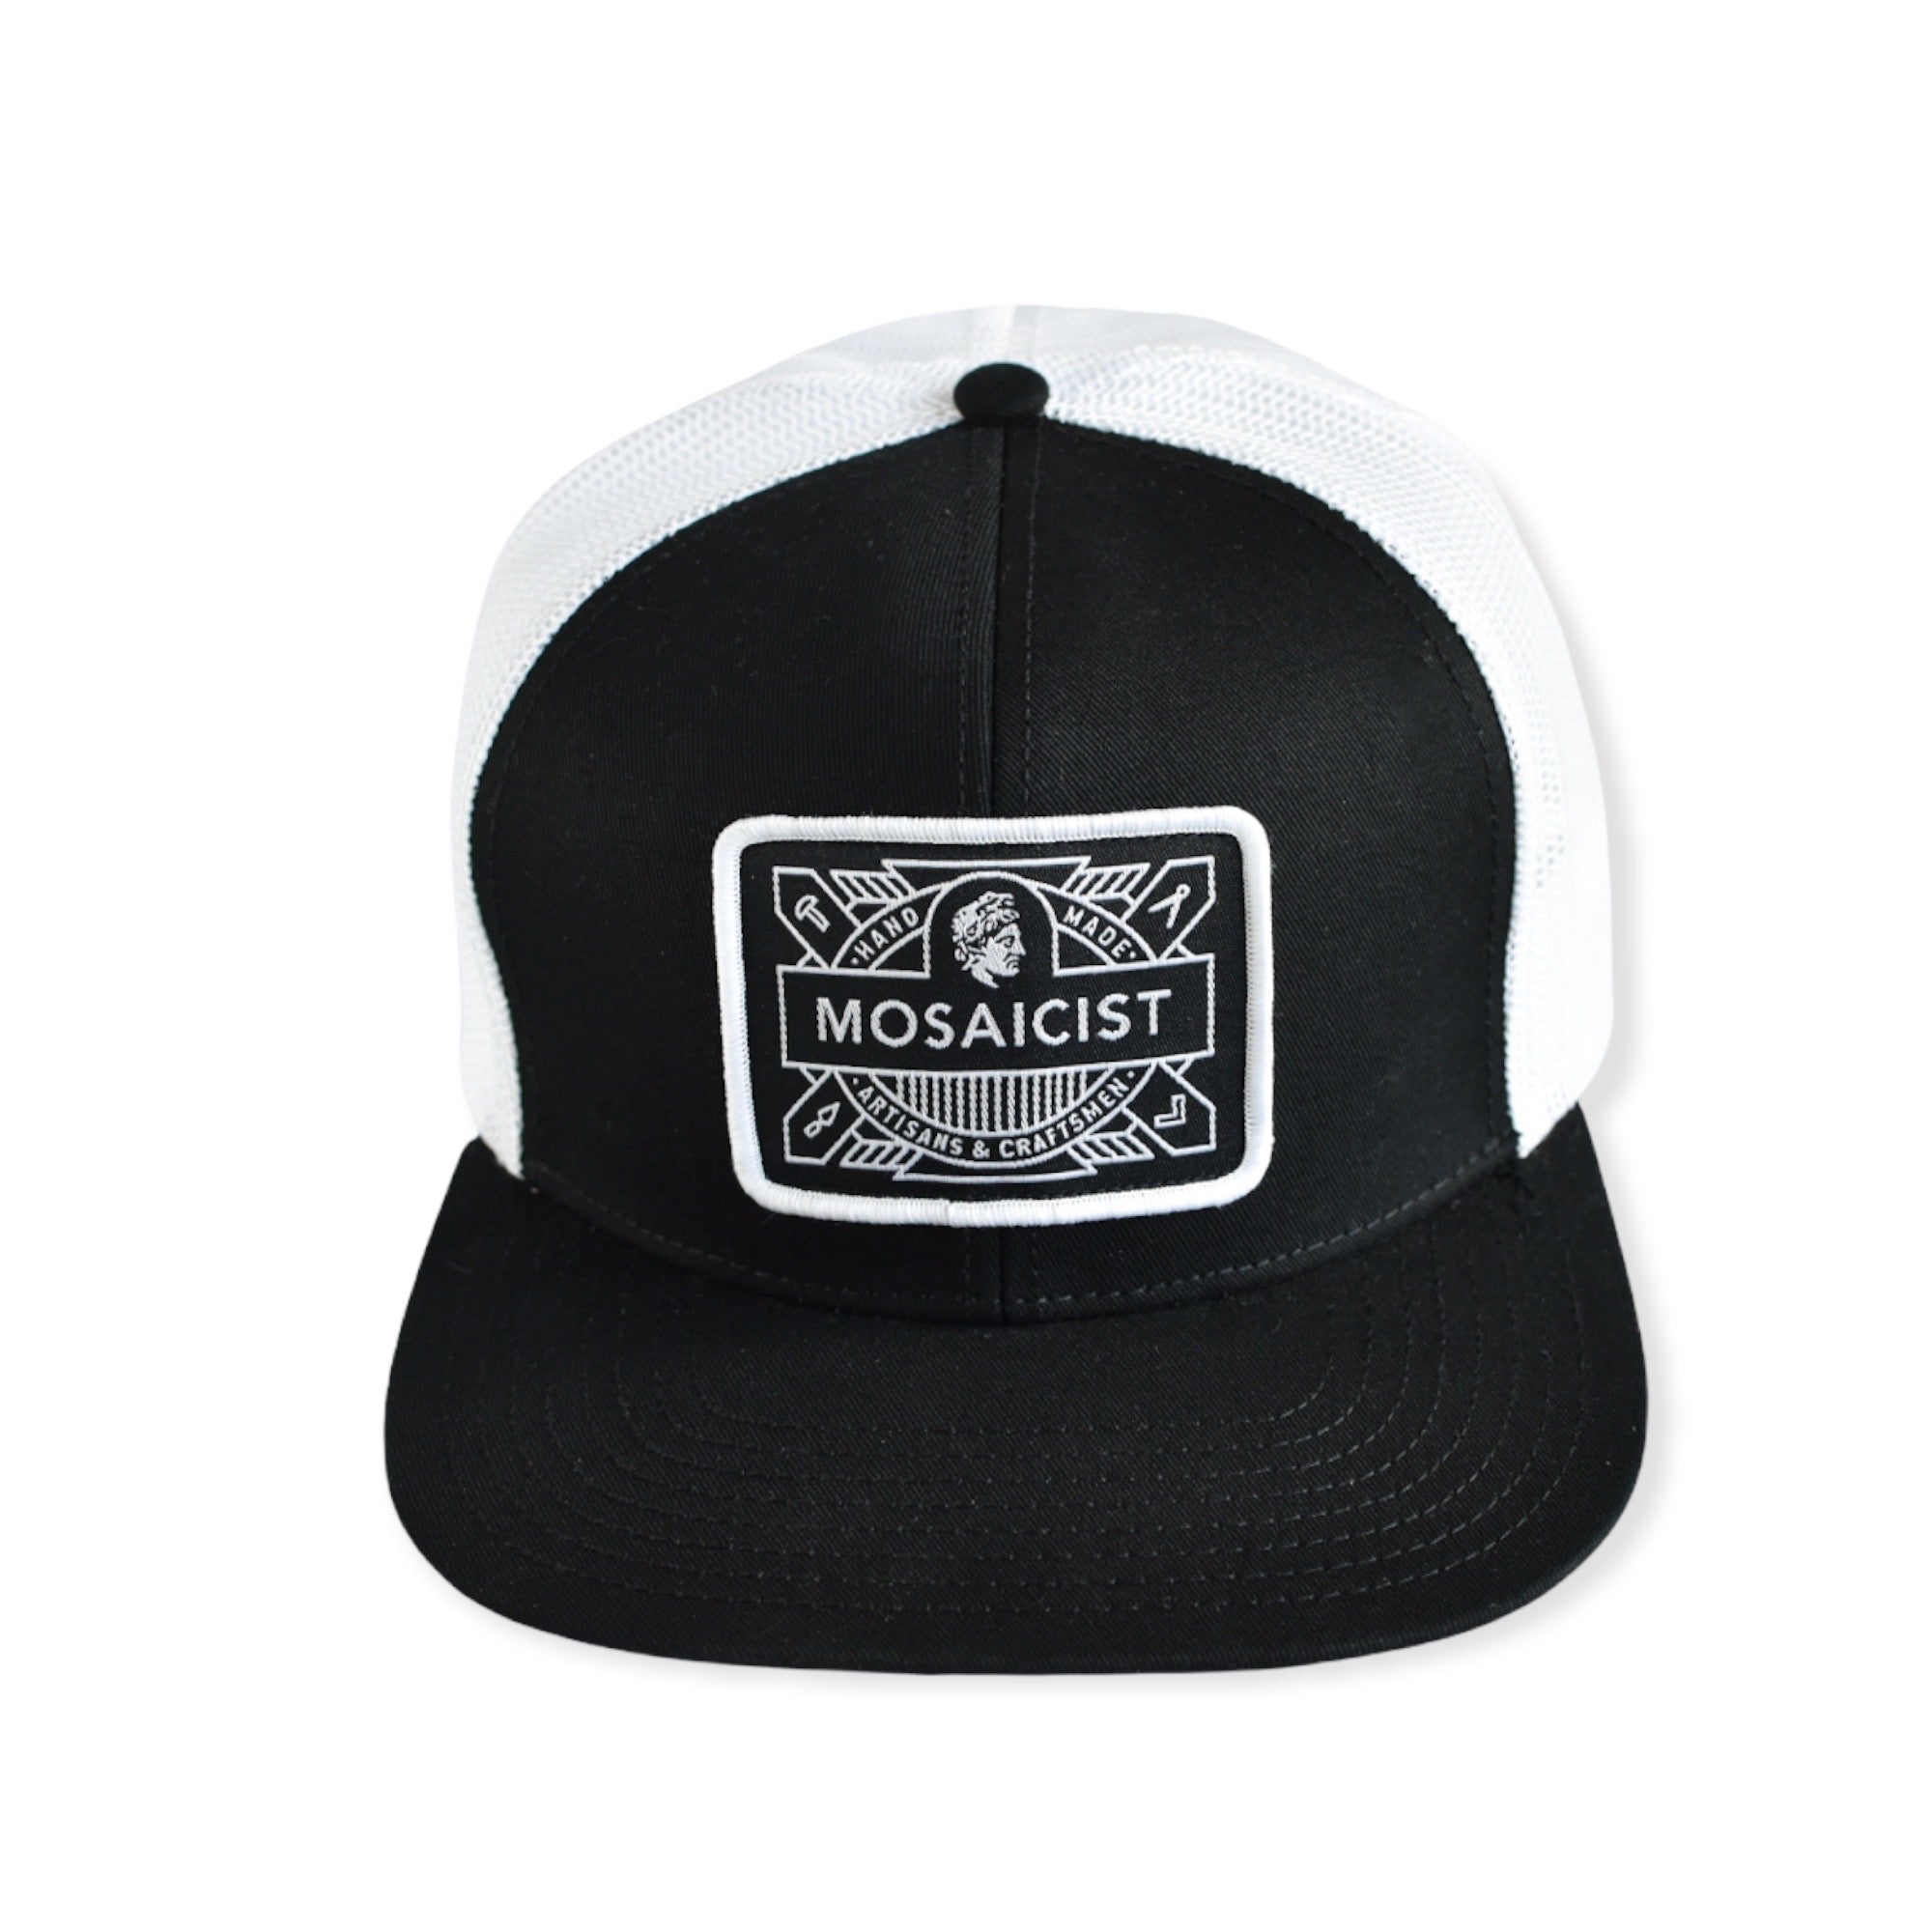 Trucker Hat from Mosaicist - Patch